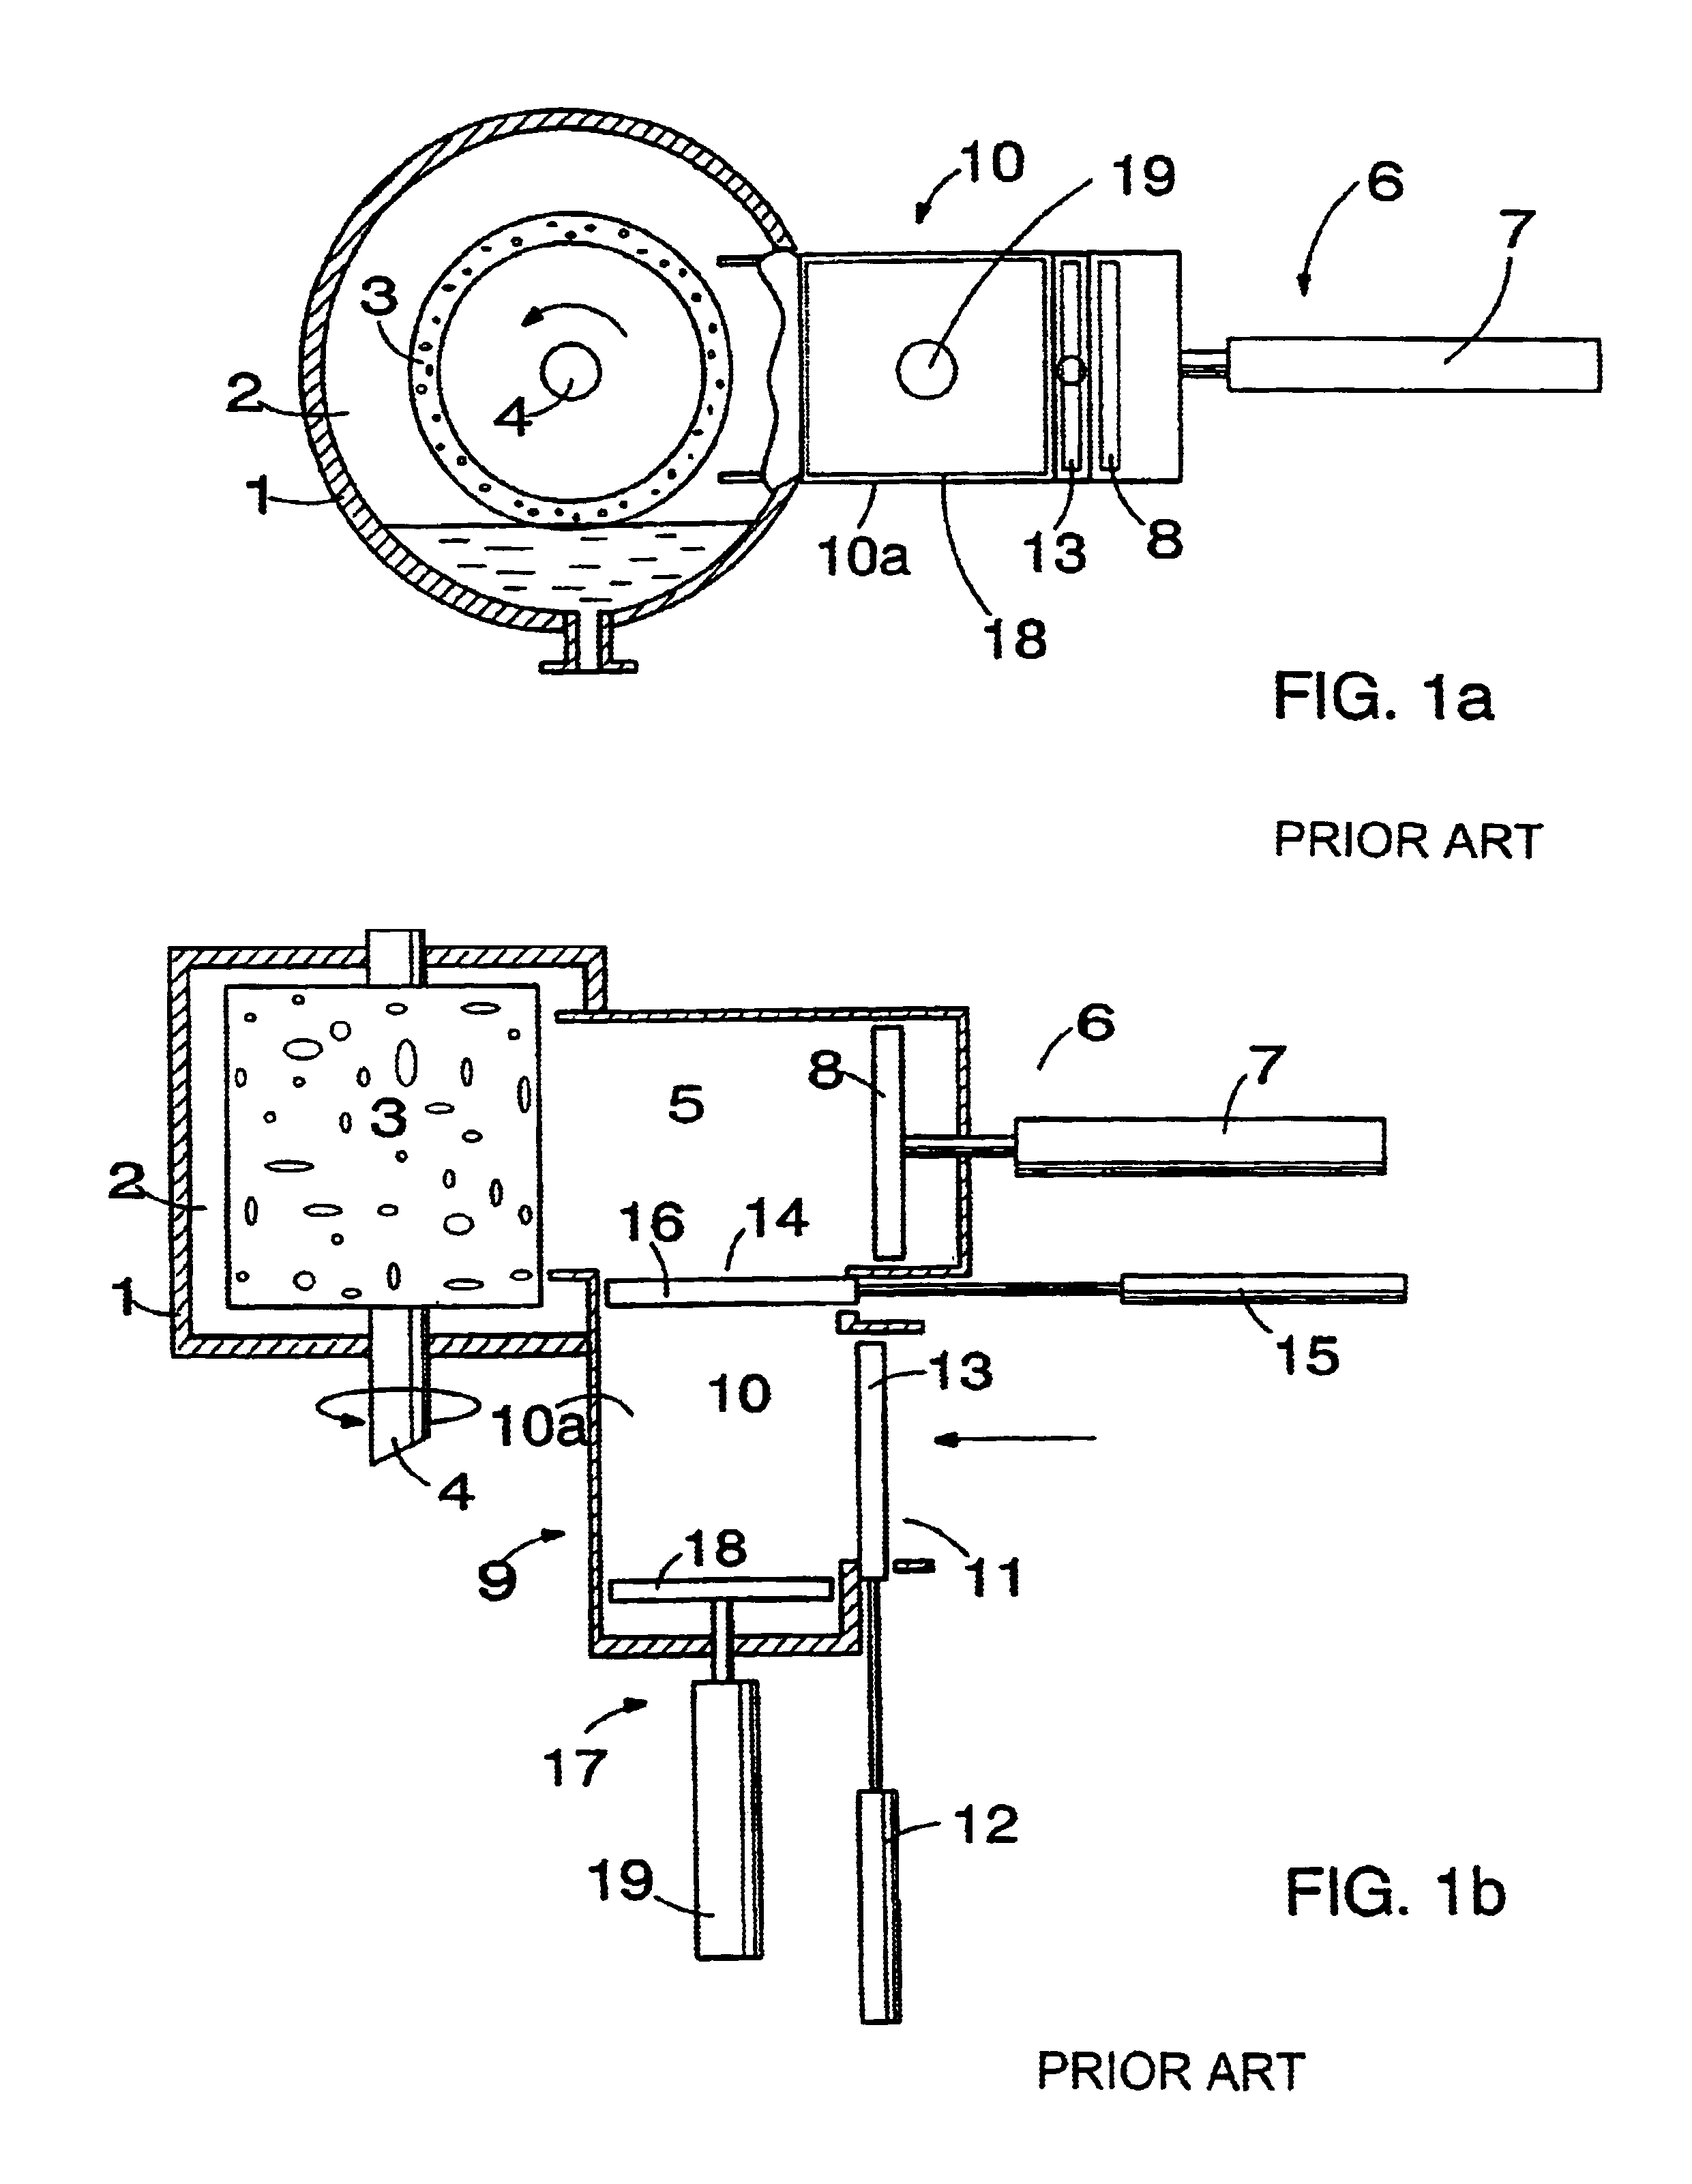 Method and arrangement for feeding wood batches into a pressure grinder